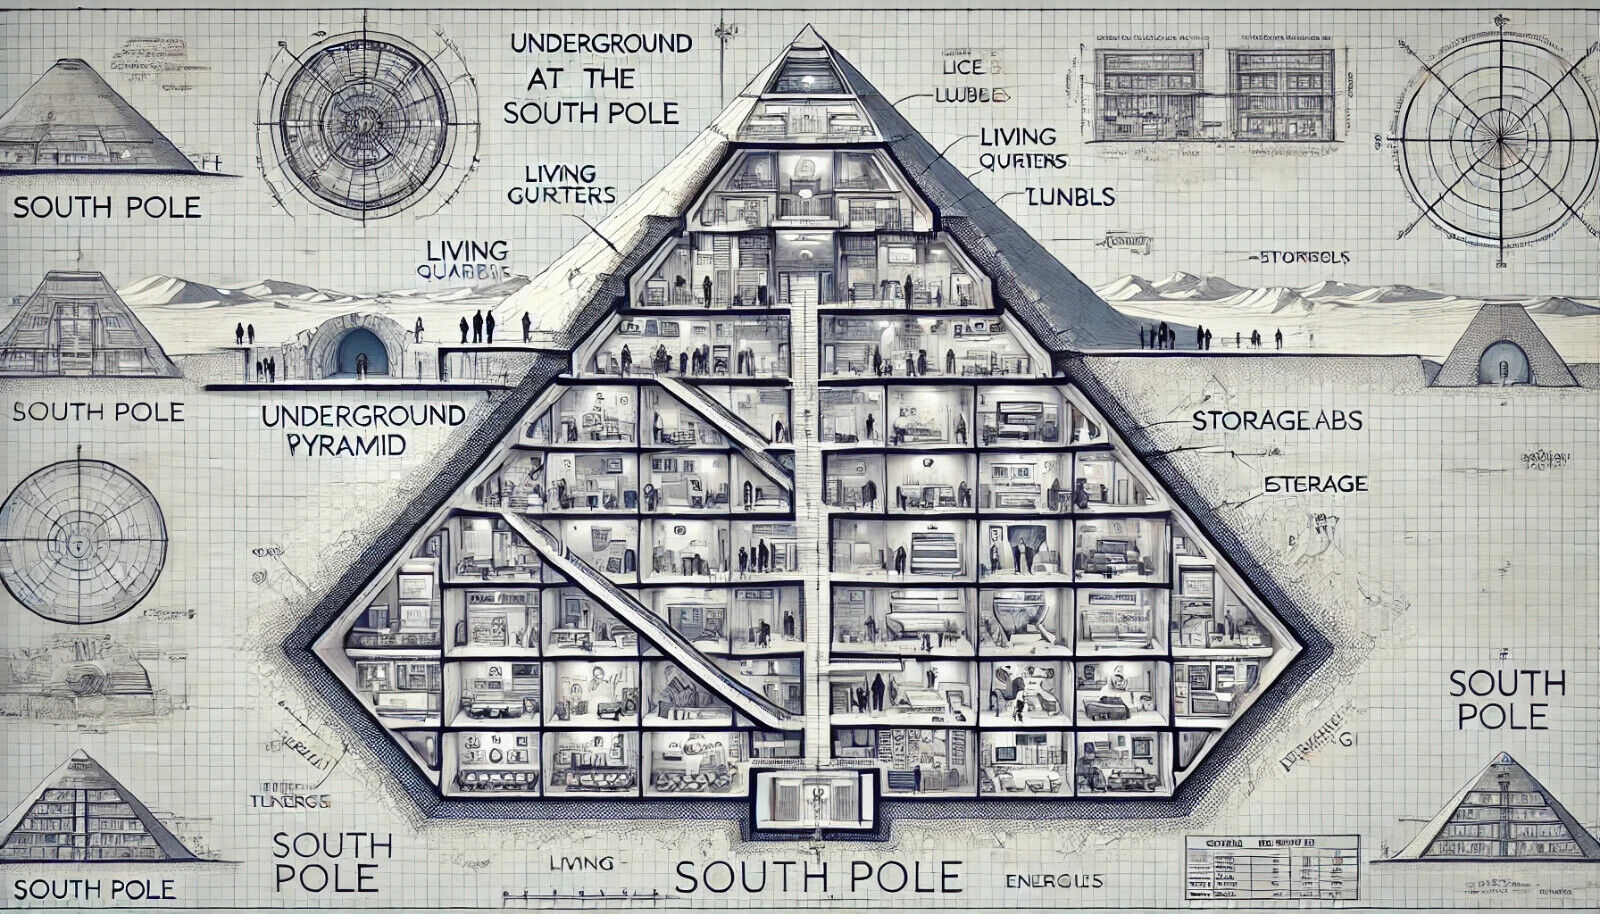 South Pole PYRAMID. Modern Giclee Print size:40 x 26 inches New